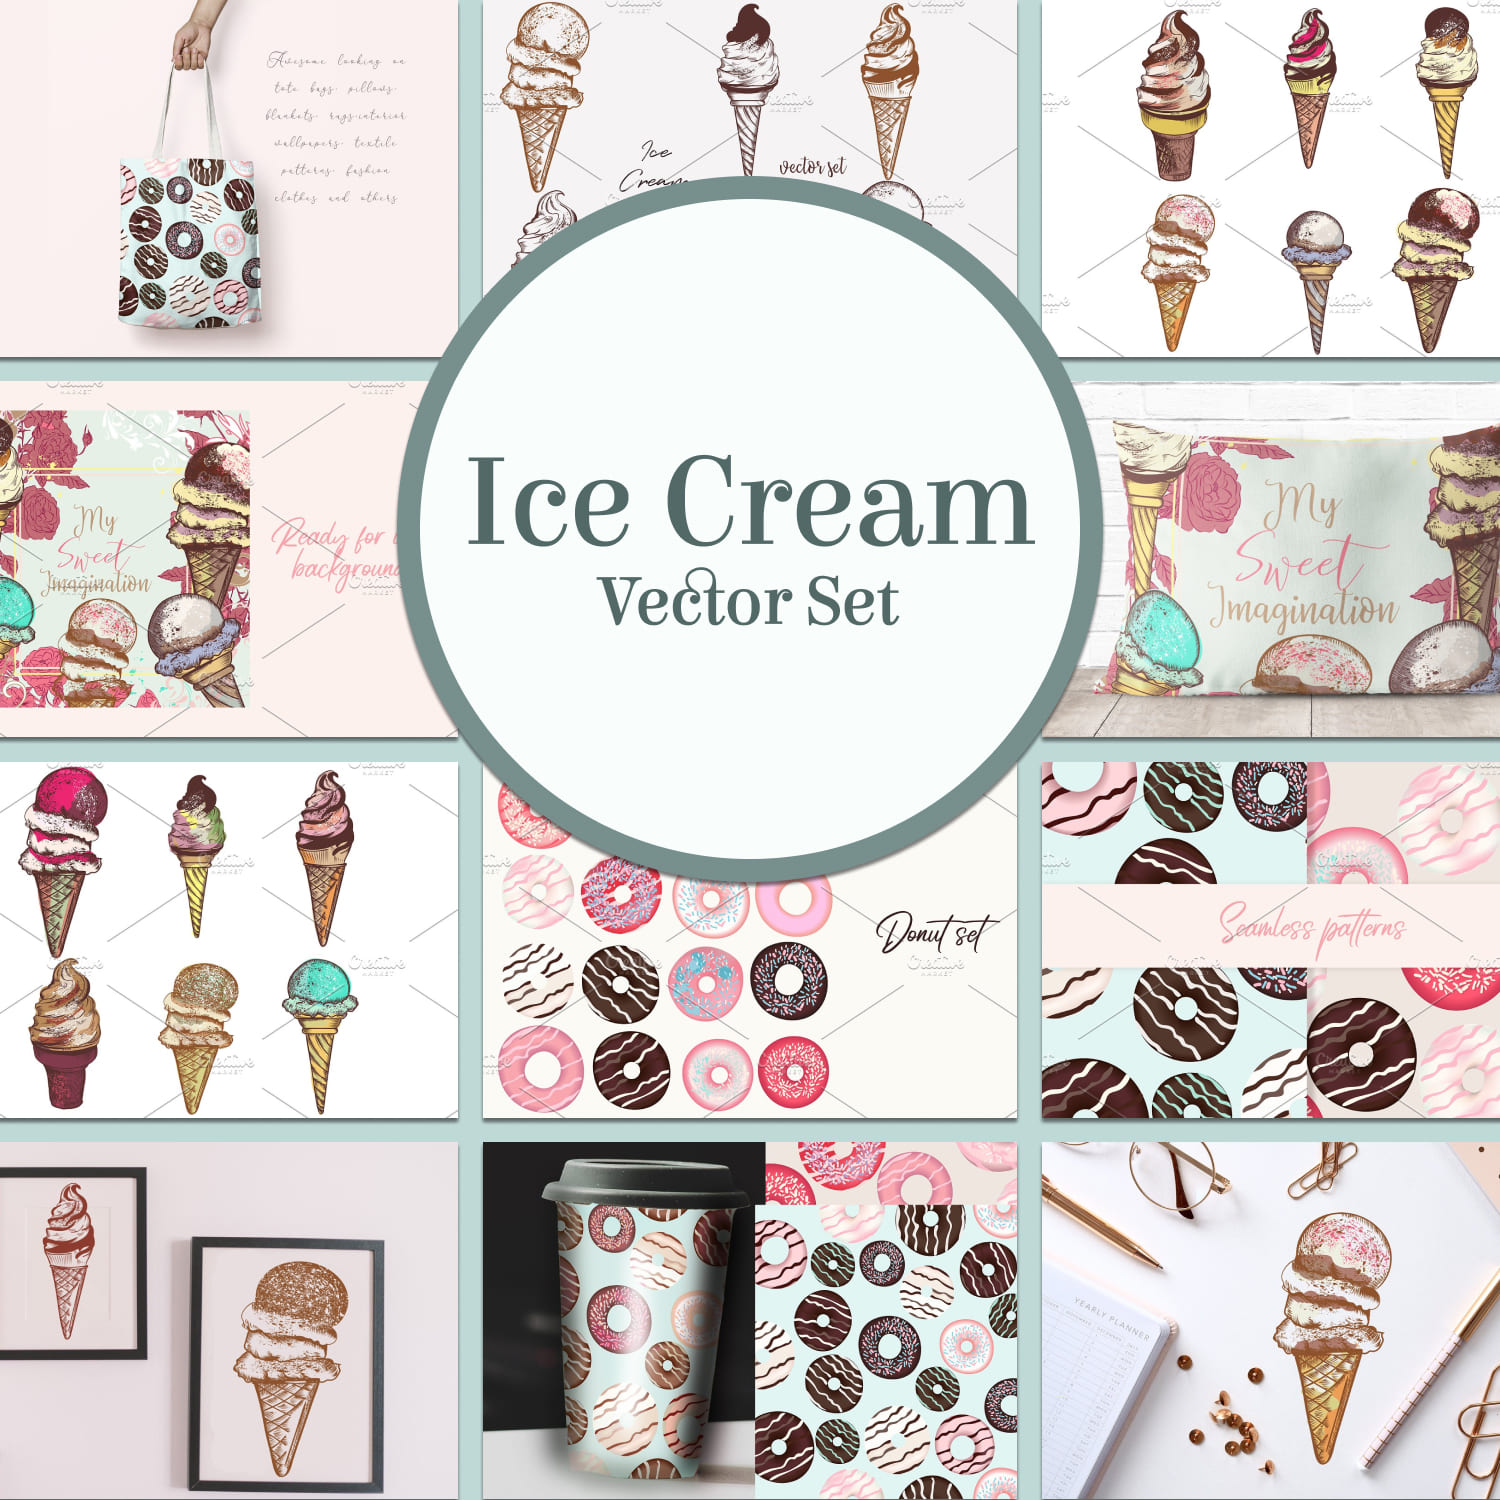 Ice cream vector set - main image preview.